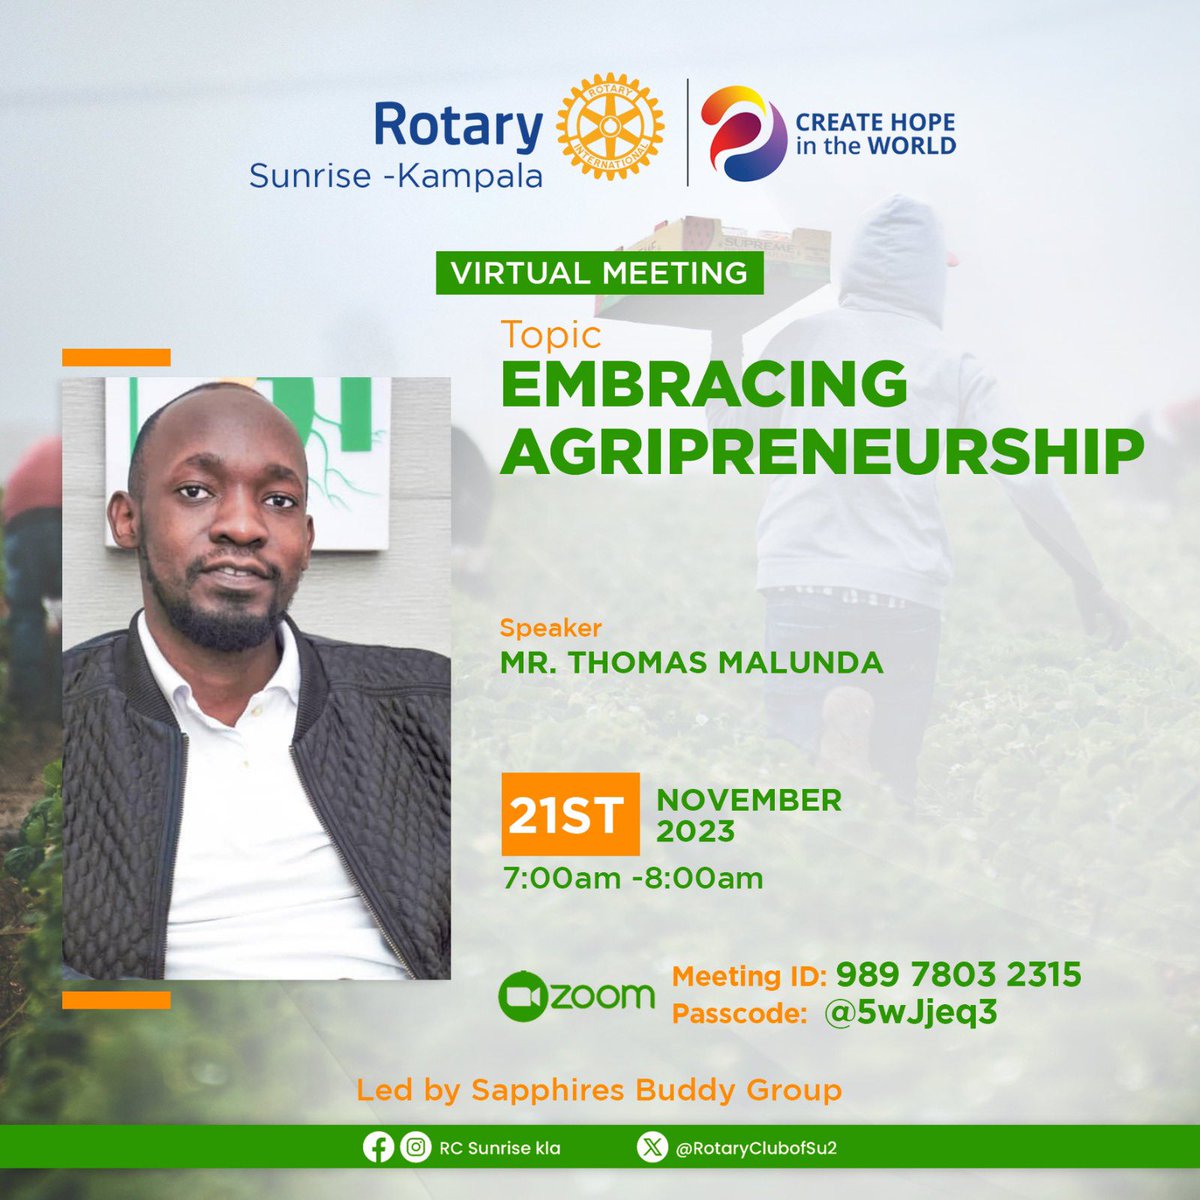 Agripreneurship is the key to help local farmers commercialize their products and compete with global market stakeholders. Join us online at 7am-8am 21st November 2023 as Mr. Thomas Mulunda shares with us. Don’t miss and invite a friend.
#RCsunriseMeetsUp
#CreatingHopeInTheWorld